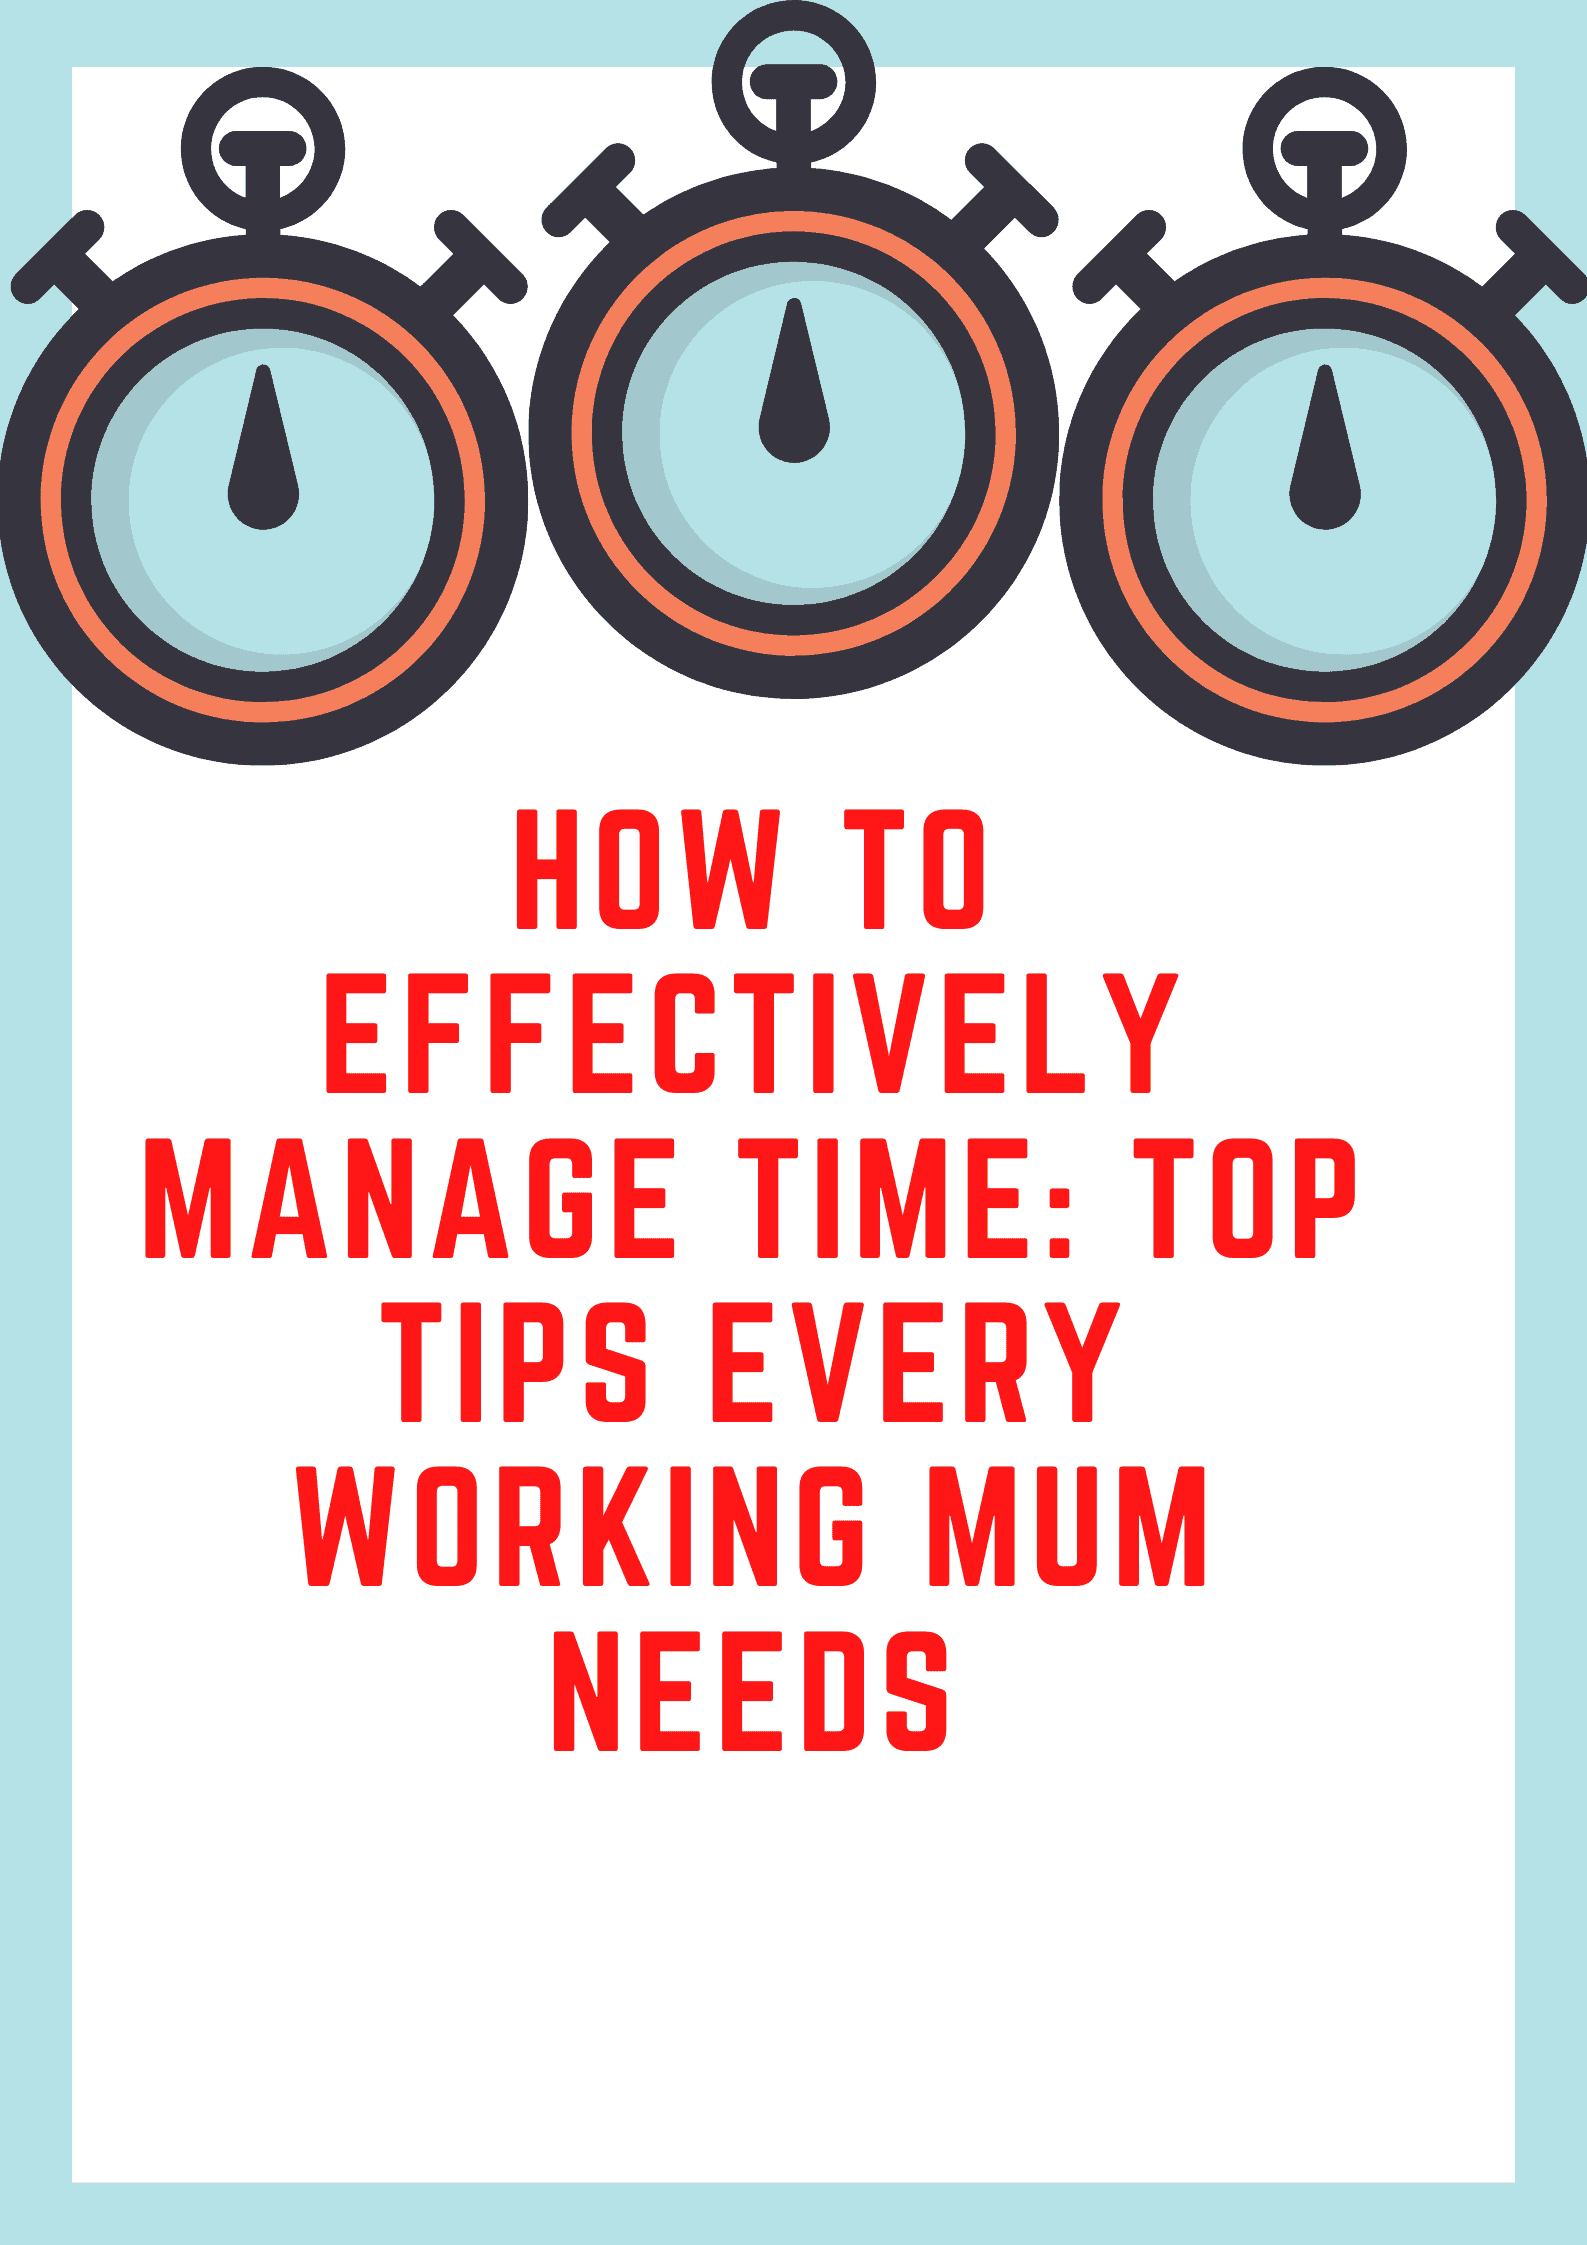 Top 8 Expert Secrets in Managing Time that Full-Time Working Moms Need